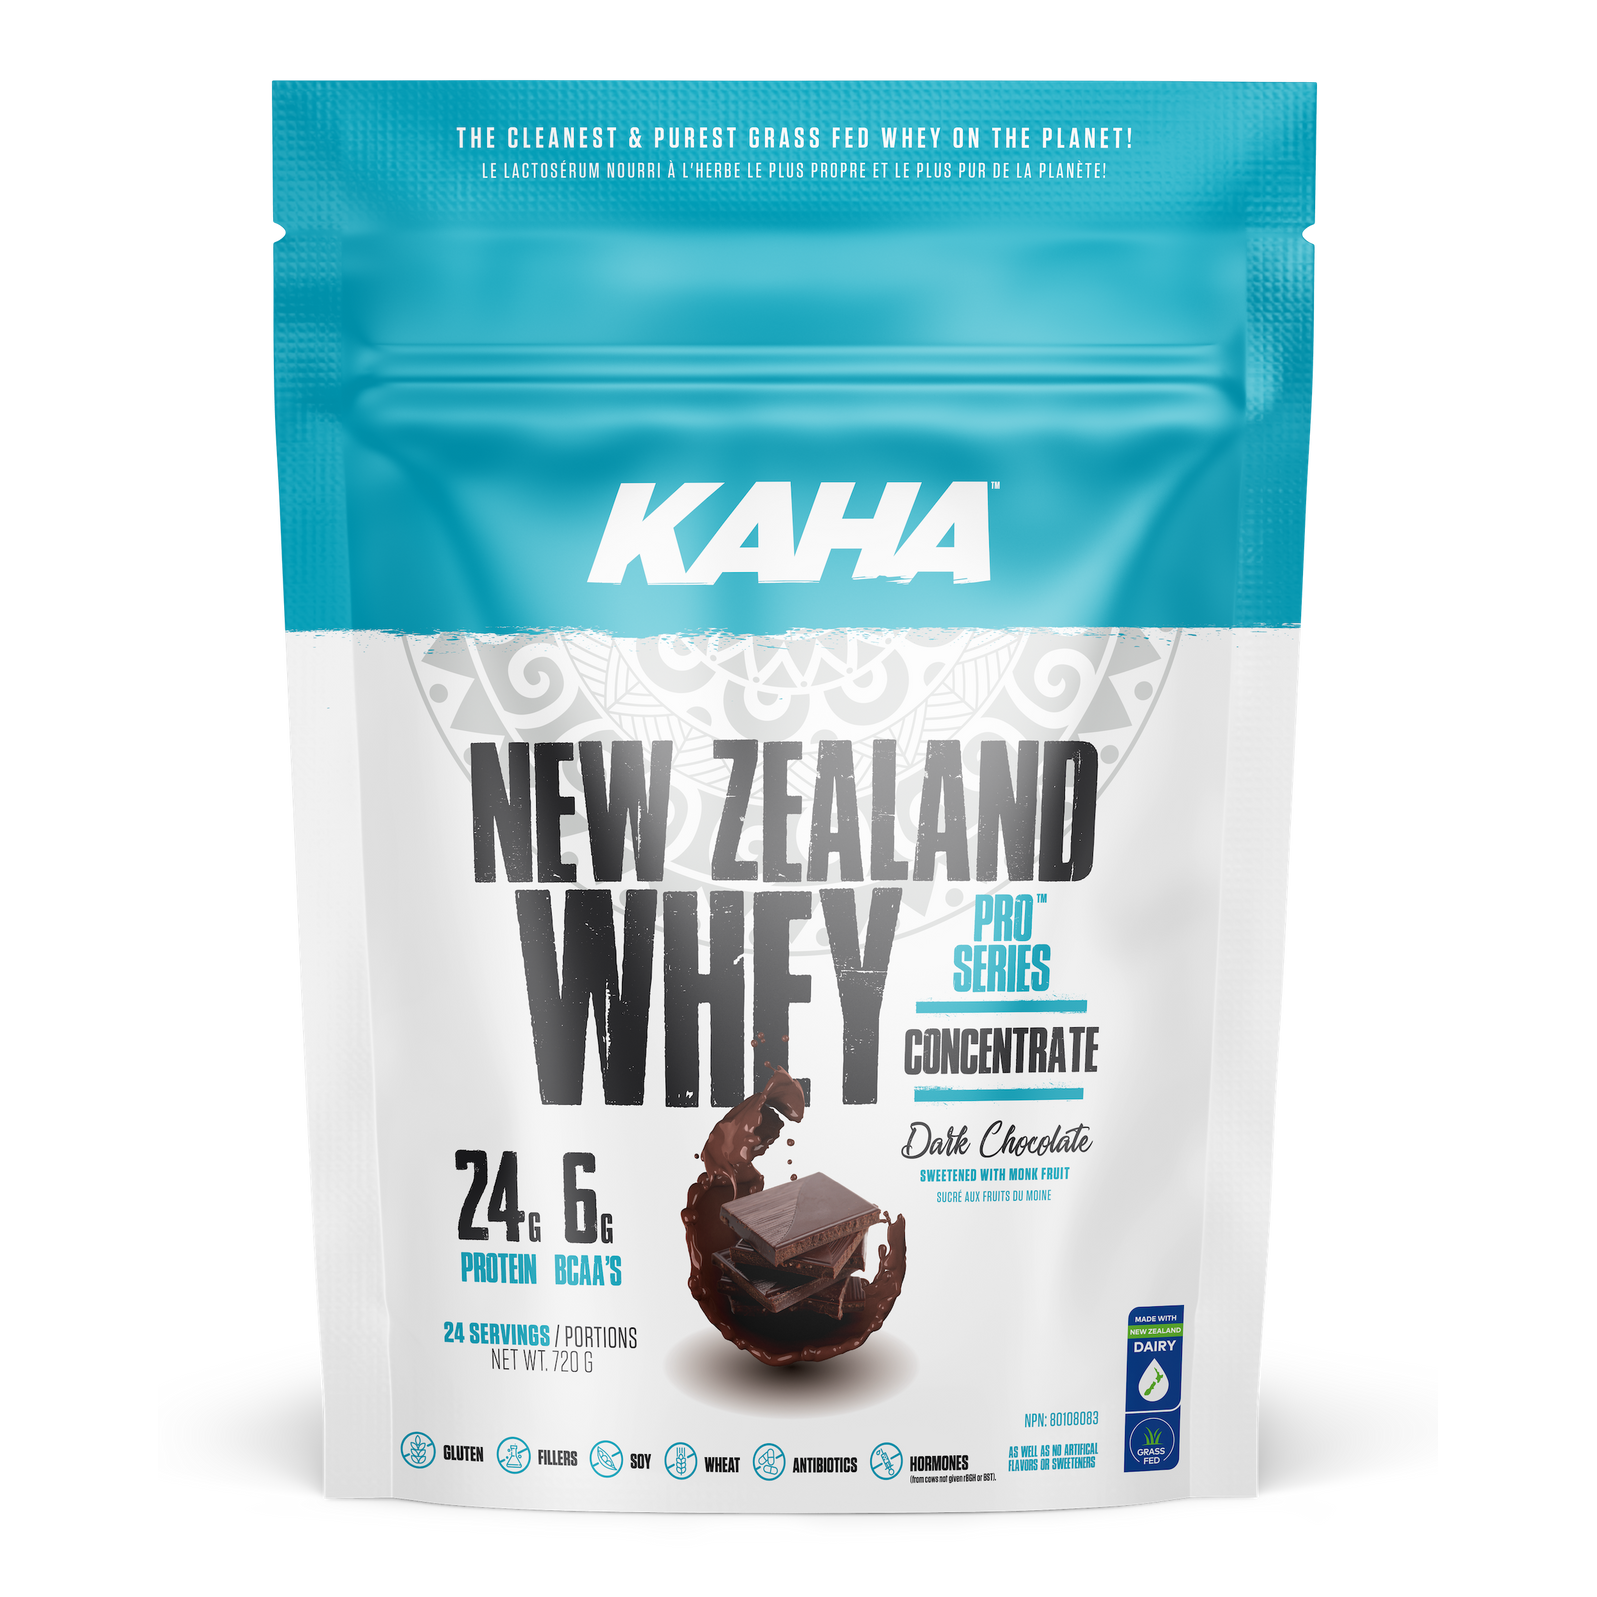 Kaha Nutrition New Zealand Whey Concentrate (Pro Series) in Dark Chocolate